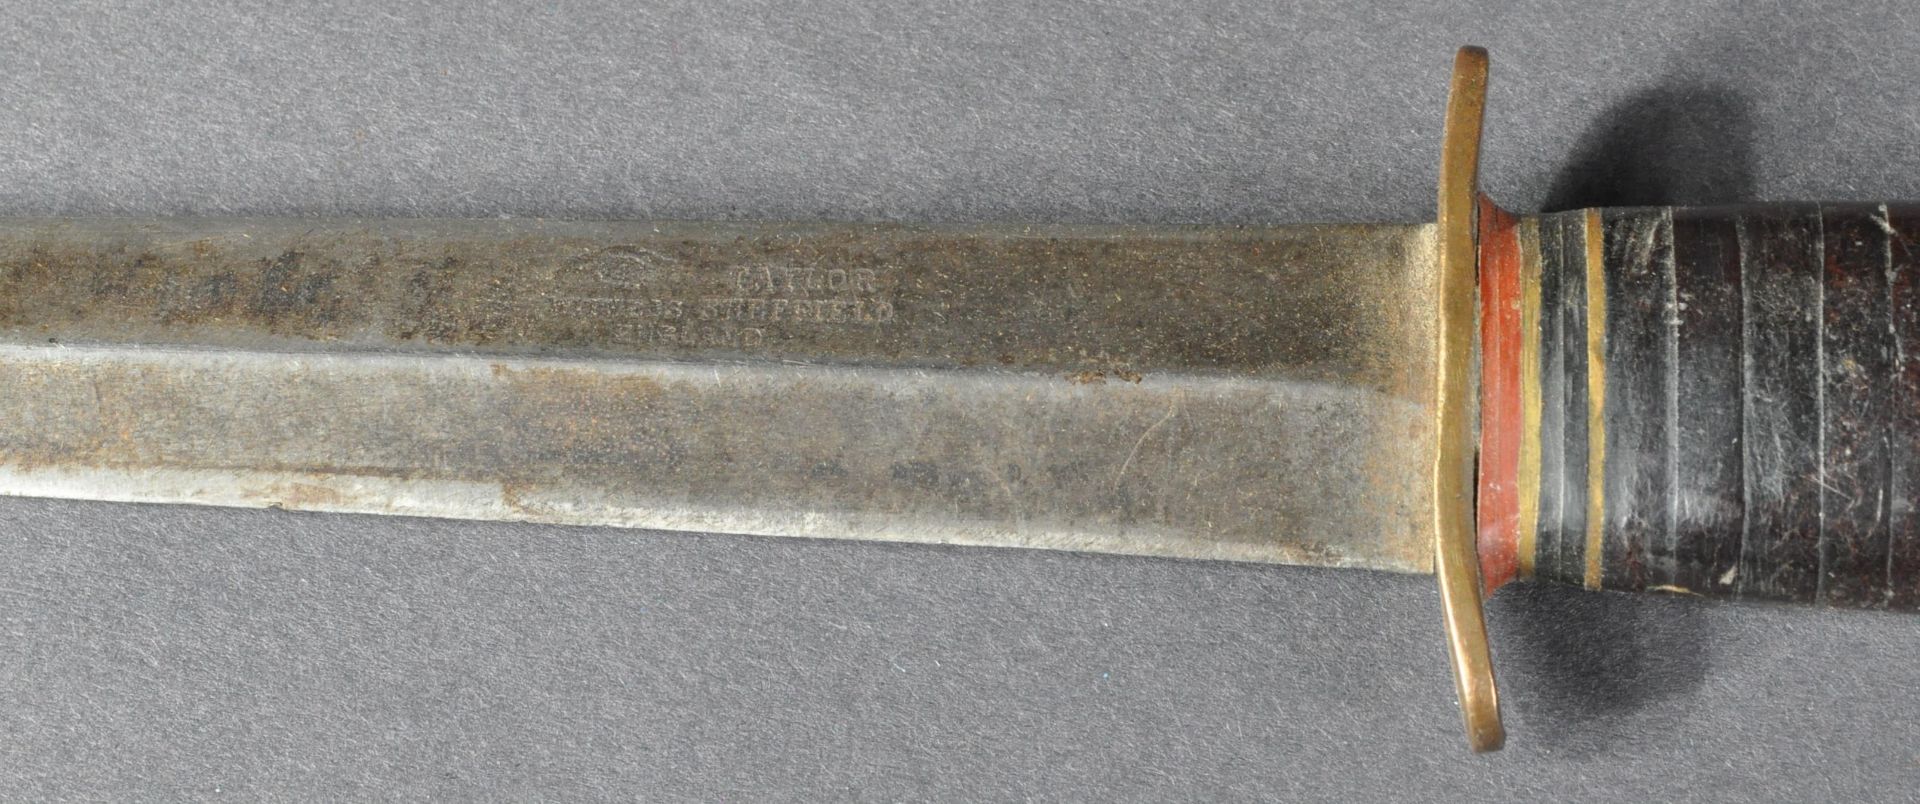 WWI FIRST WORLD WAR TAYLOR OF SHEFFIELD FIGHTING DAGGER - Image 3 of 4